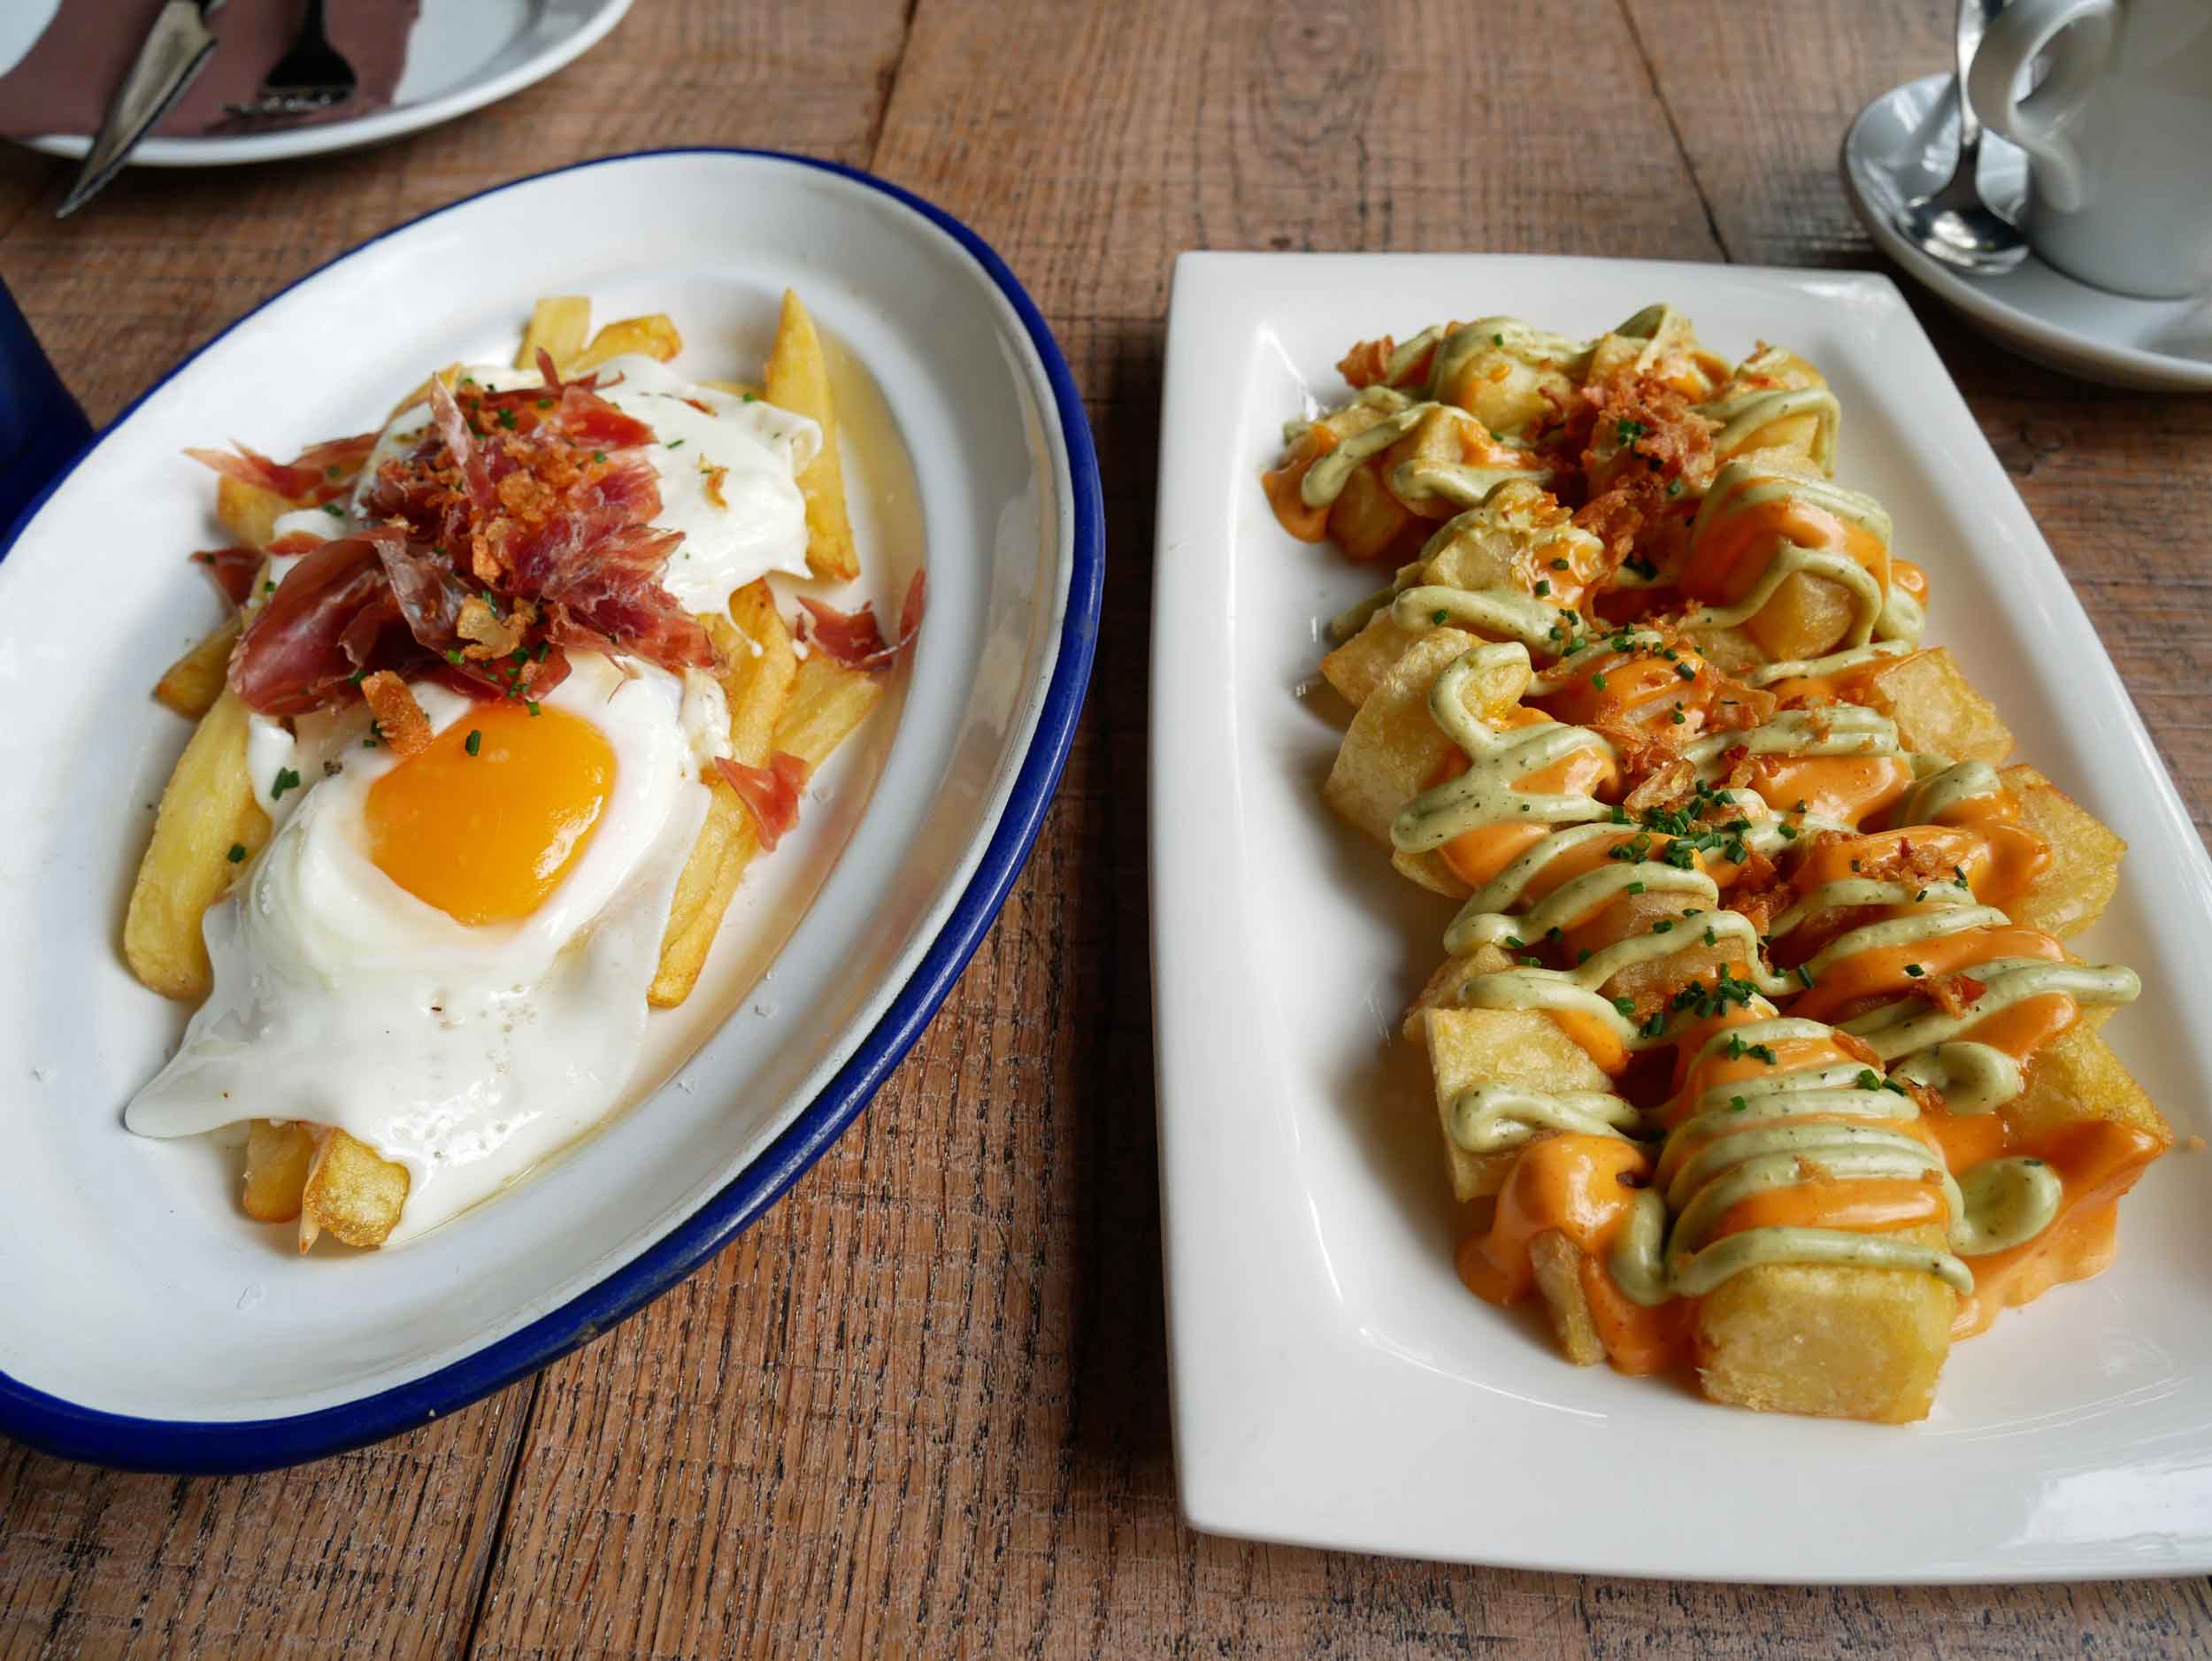  First thing we did when we arrived in Barcelona was head for  patatas bravas  and  fried egg with jam  ón  at Bodega Granados (Sept 18). 